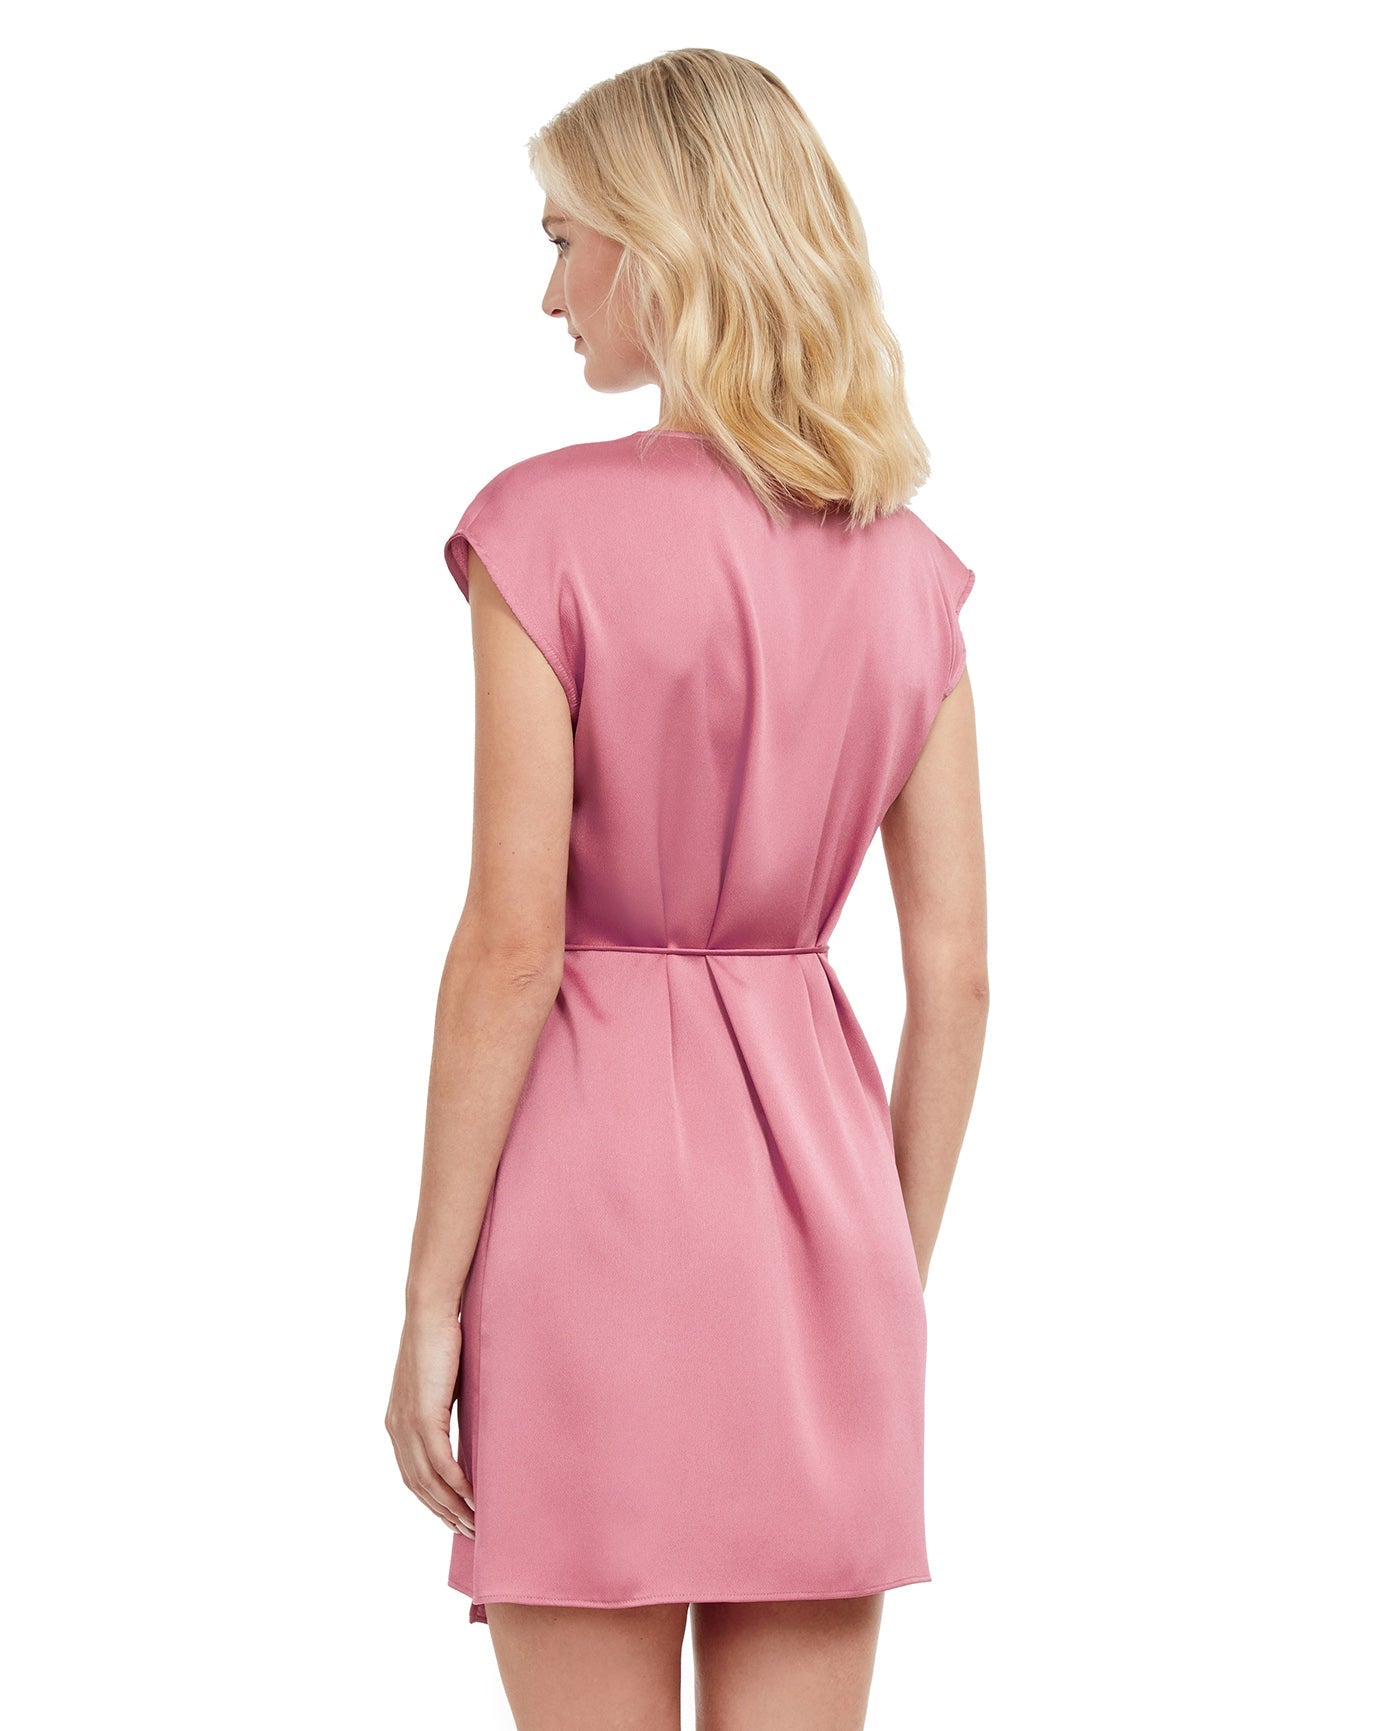 Back View Of Gottex Classic Modern Shades Surplice Wrap Cover Up Beach Dress | Gottex Modern Shades Pink Solid